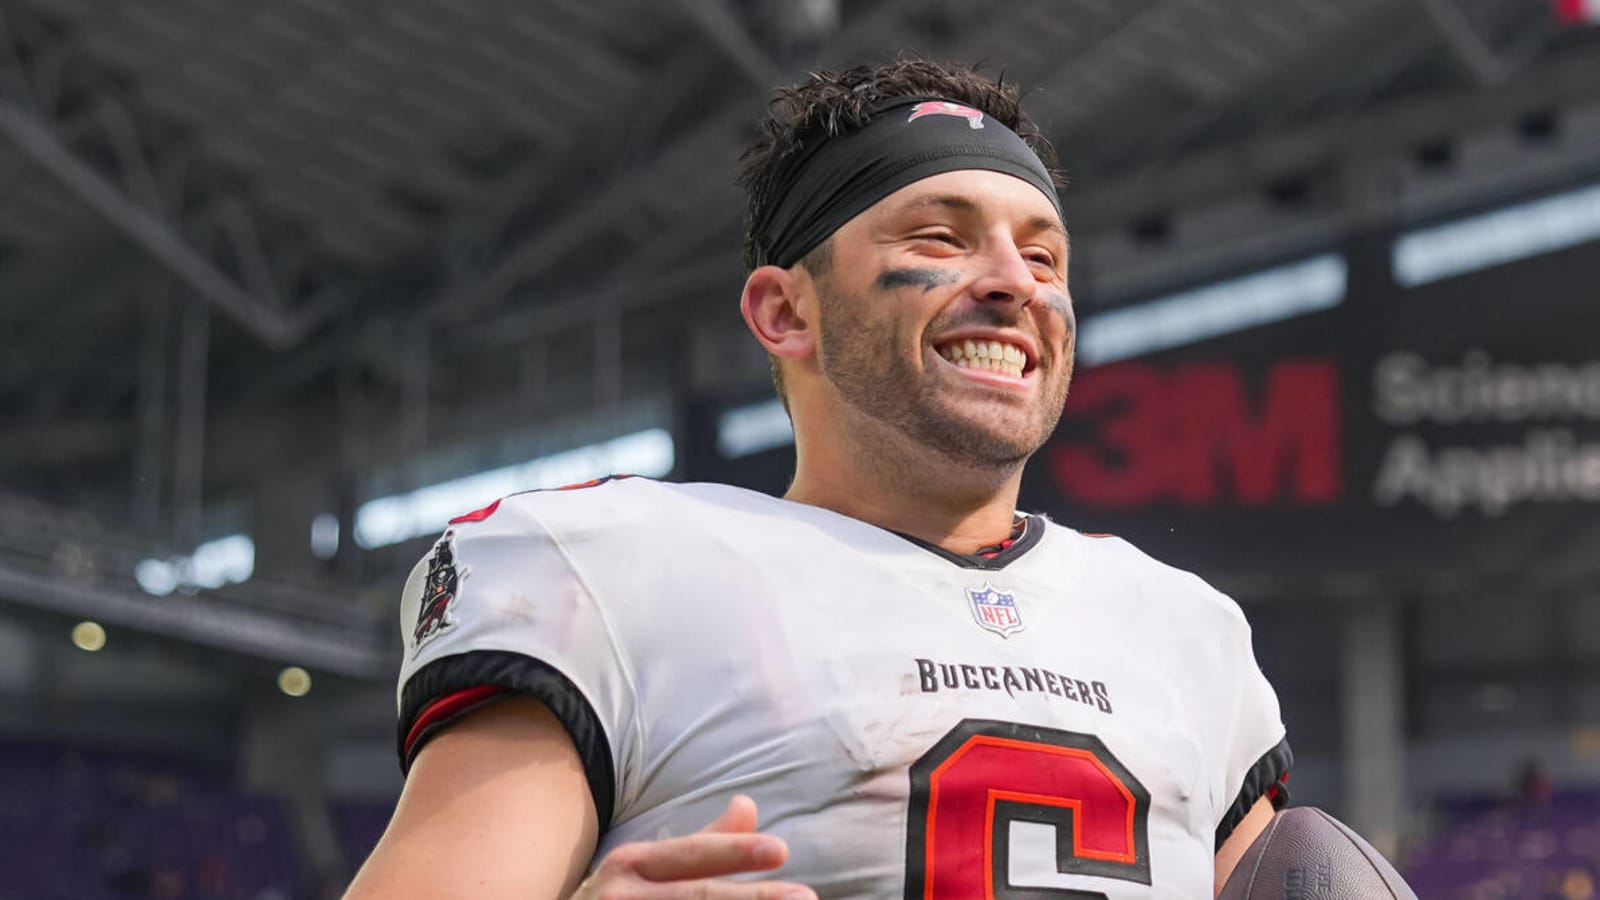 Wild Mayfield stat highlights return of confidence for Bucs QB